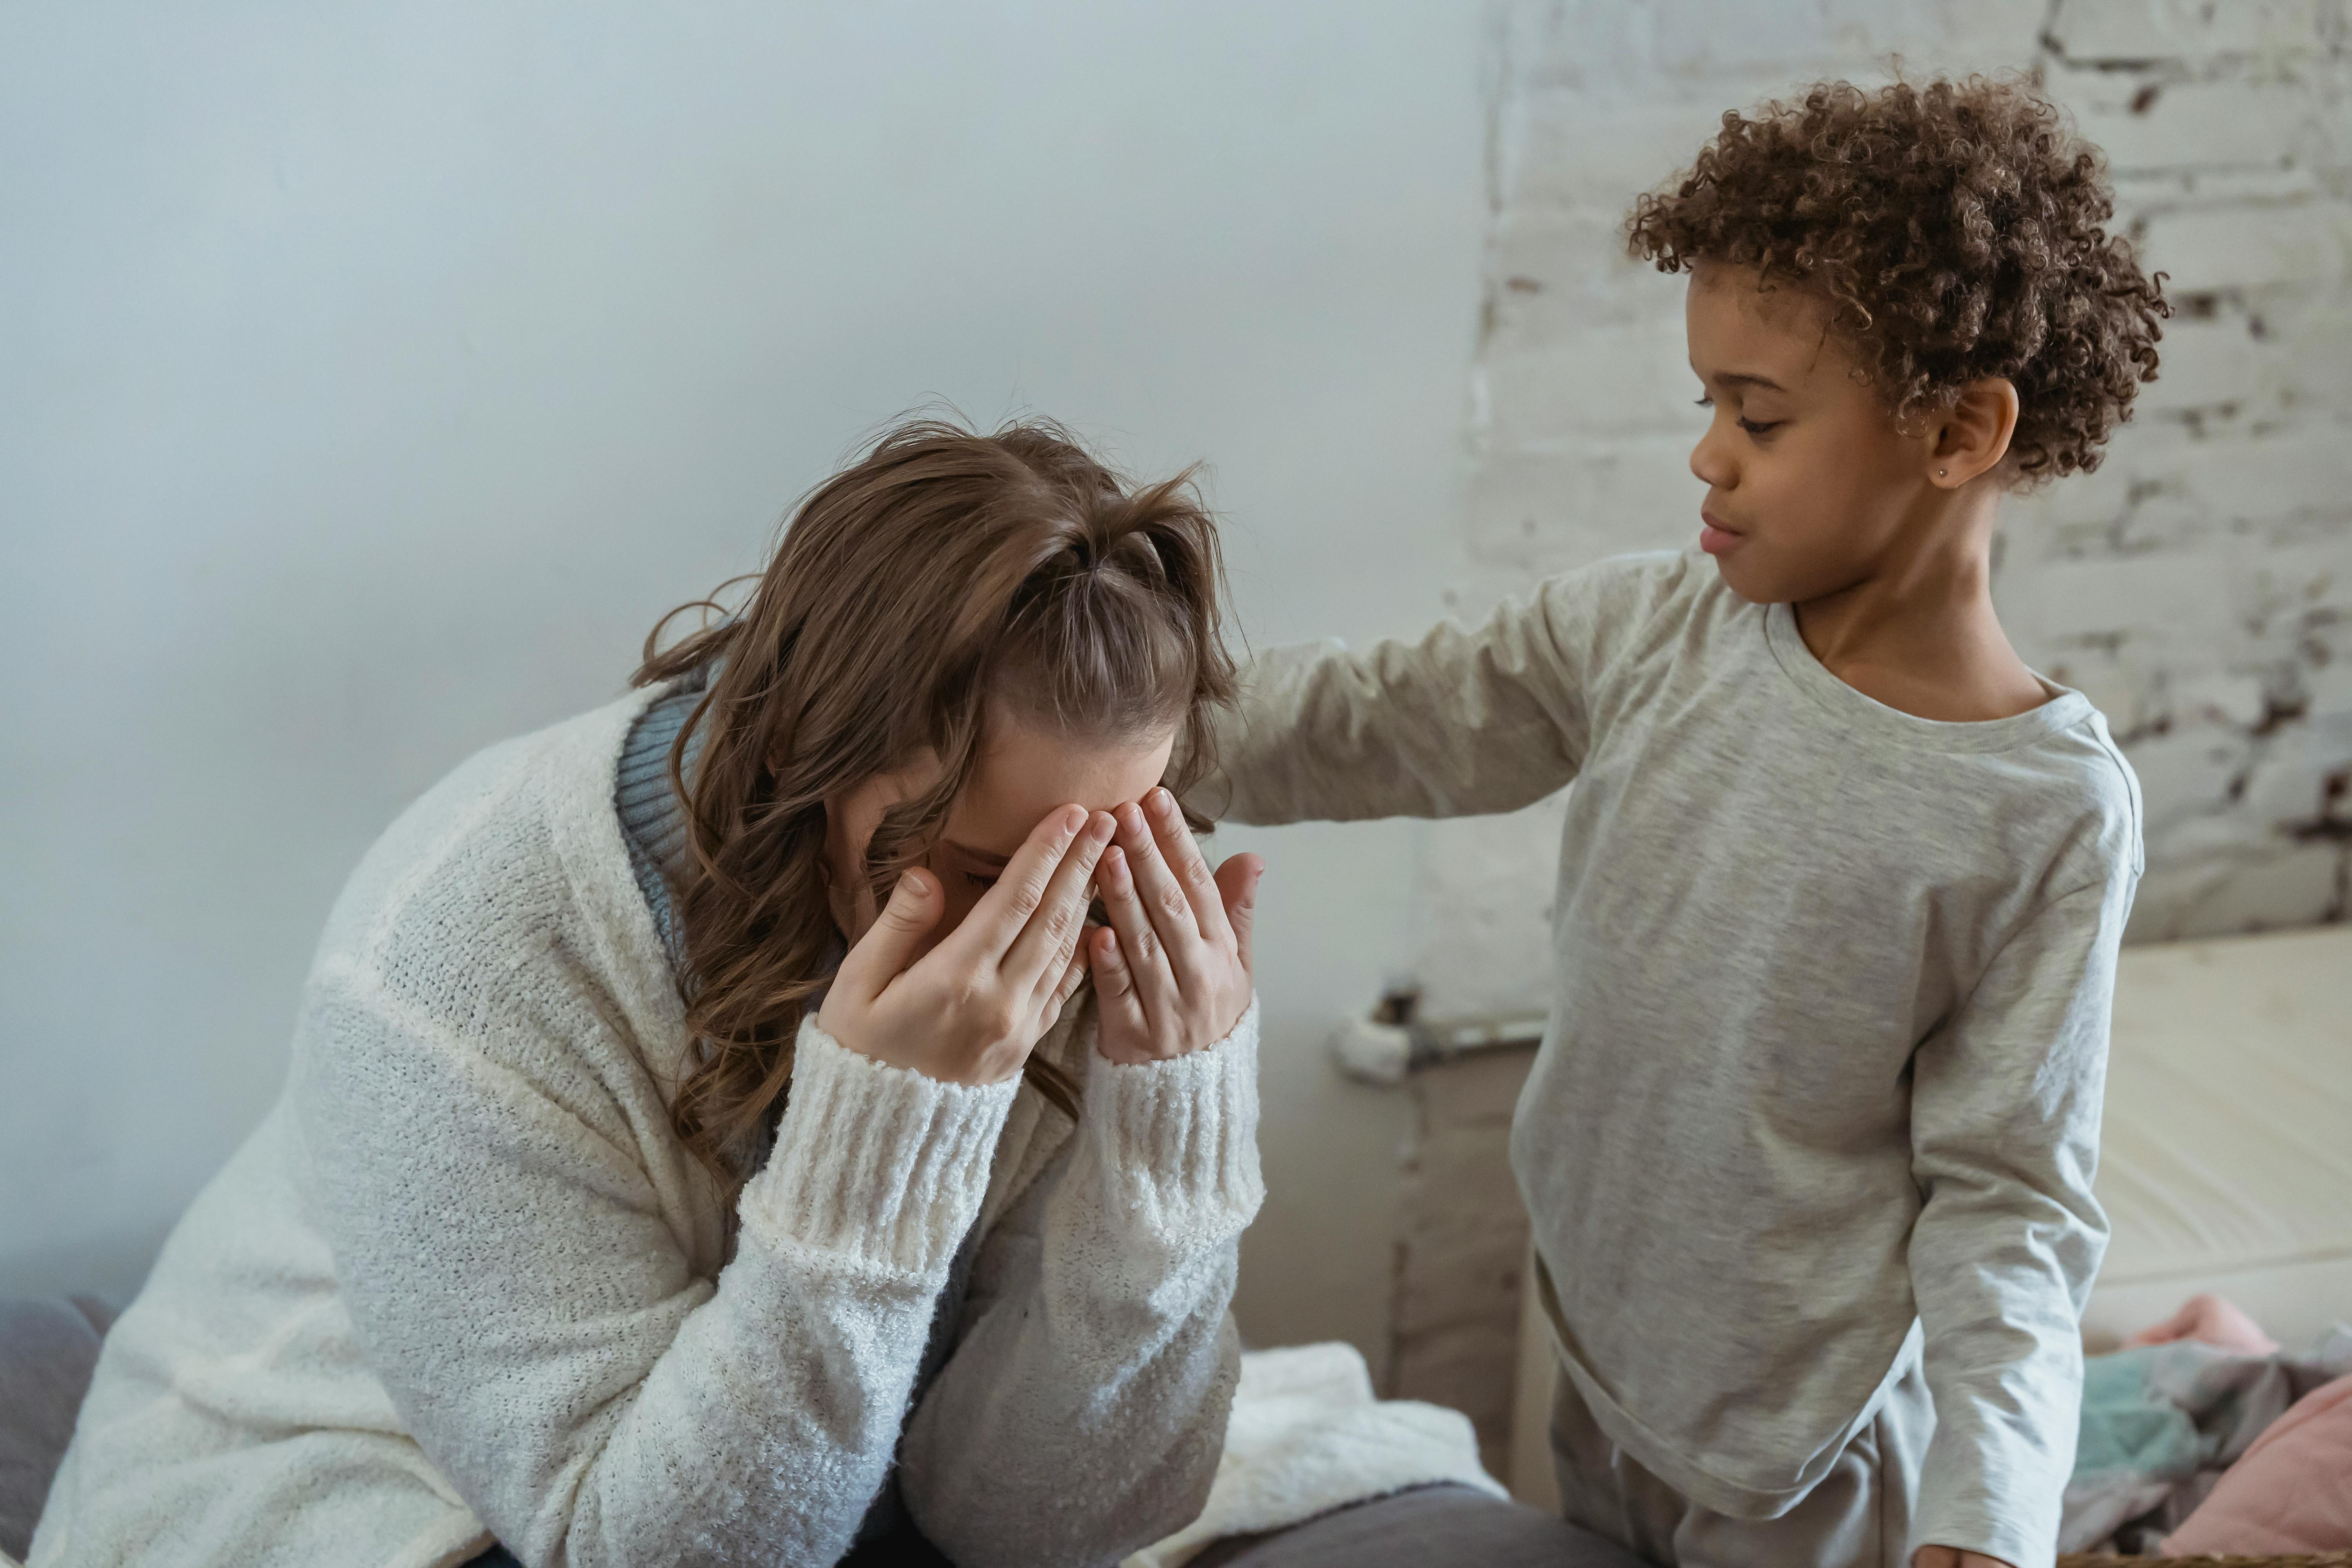 Claire's son, Noah, comforts her after she loses her job | Source: Pexels